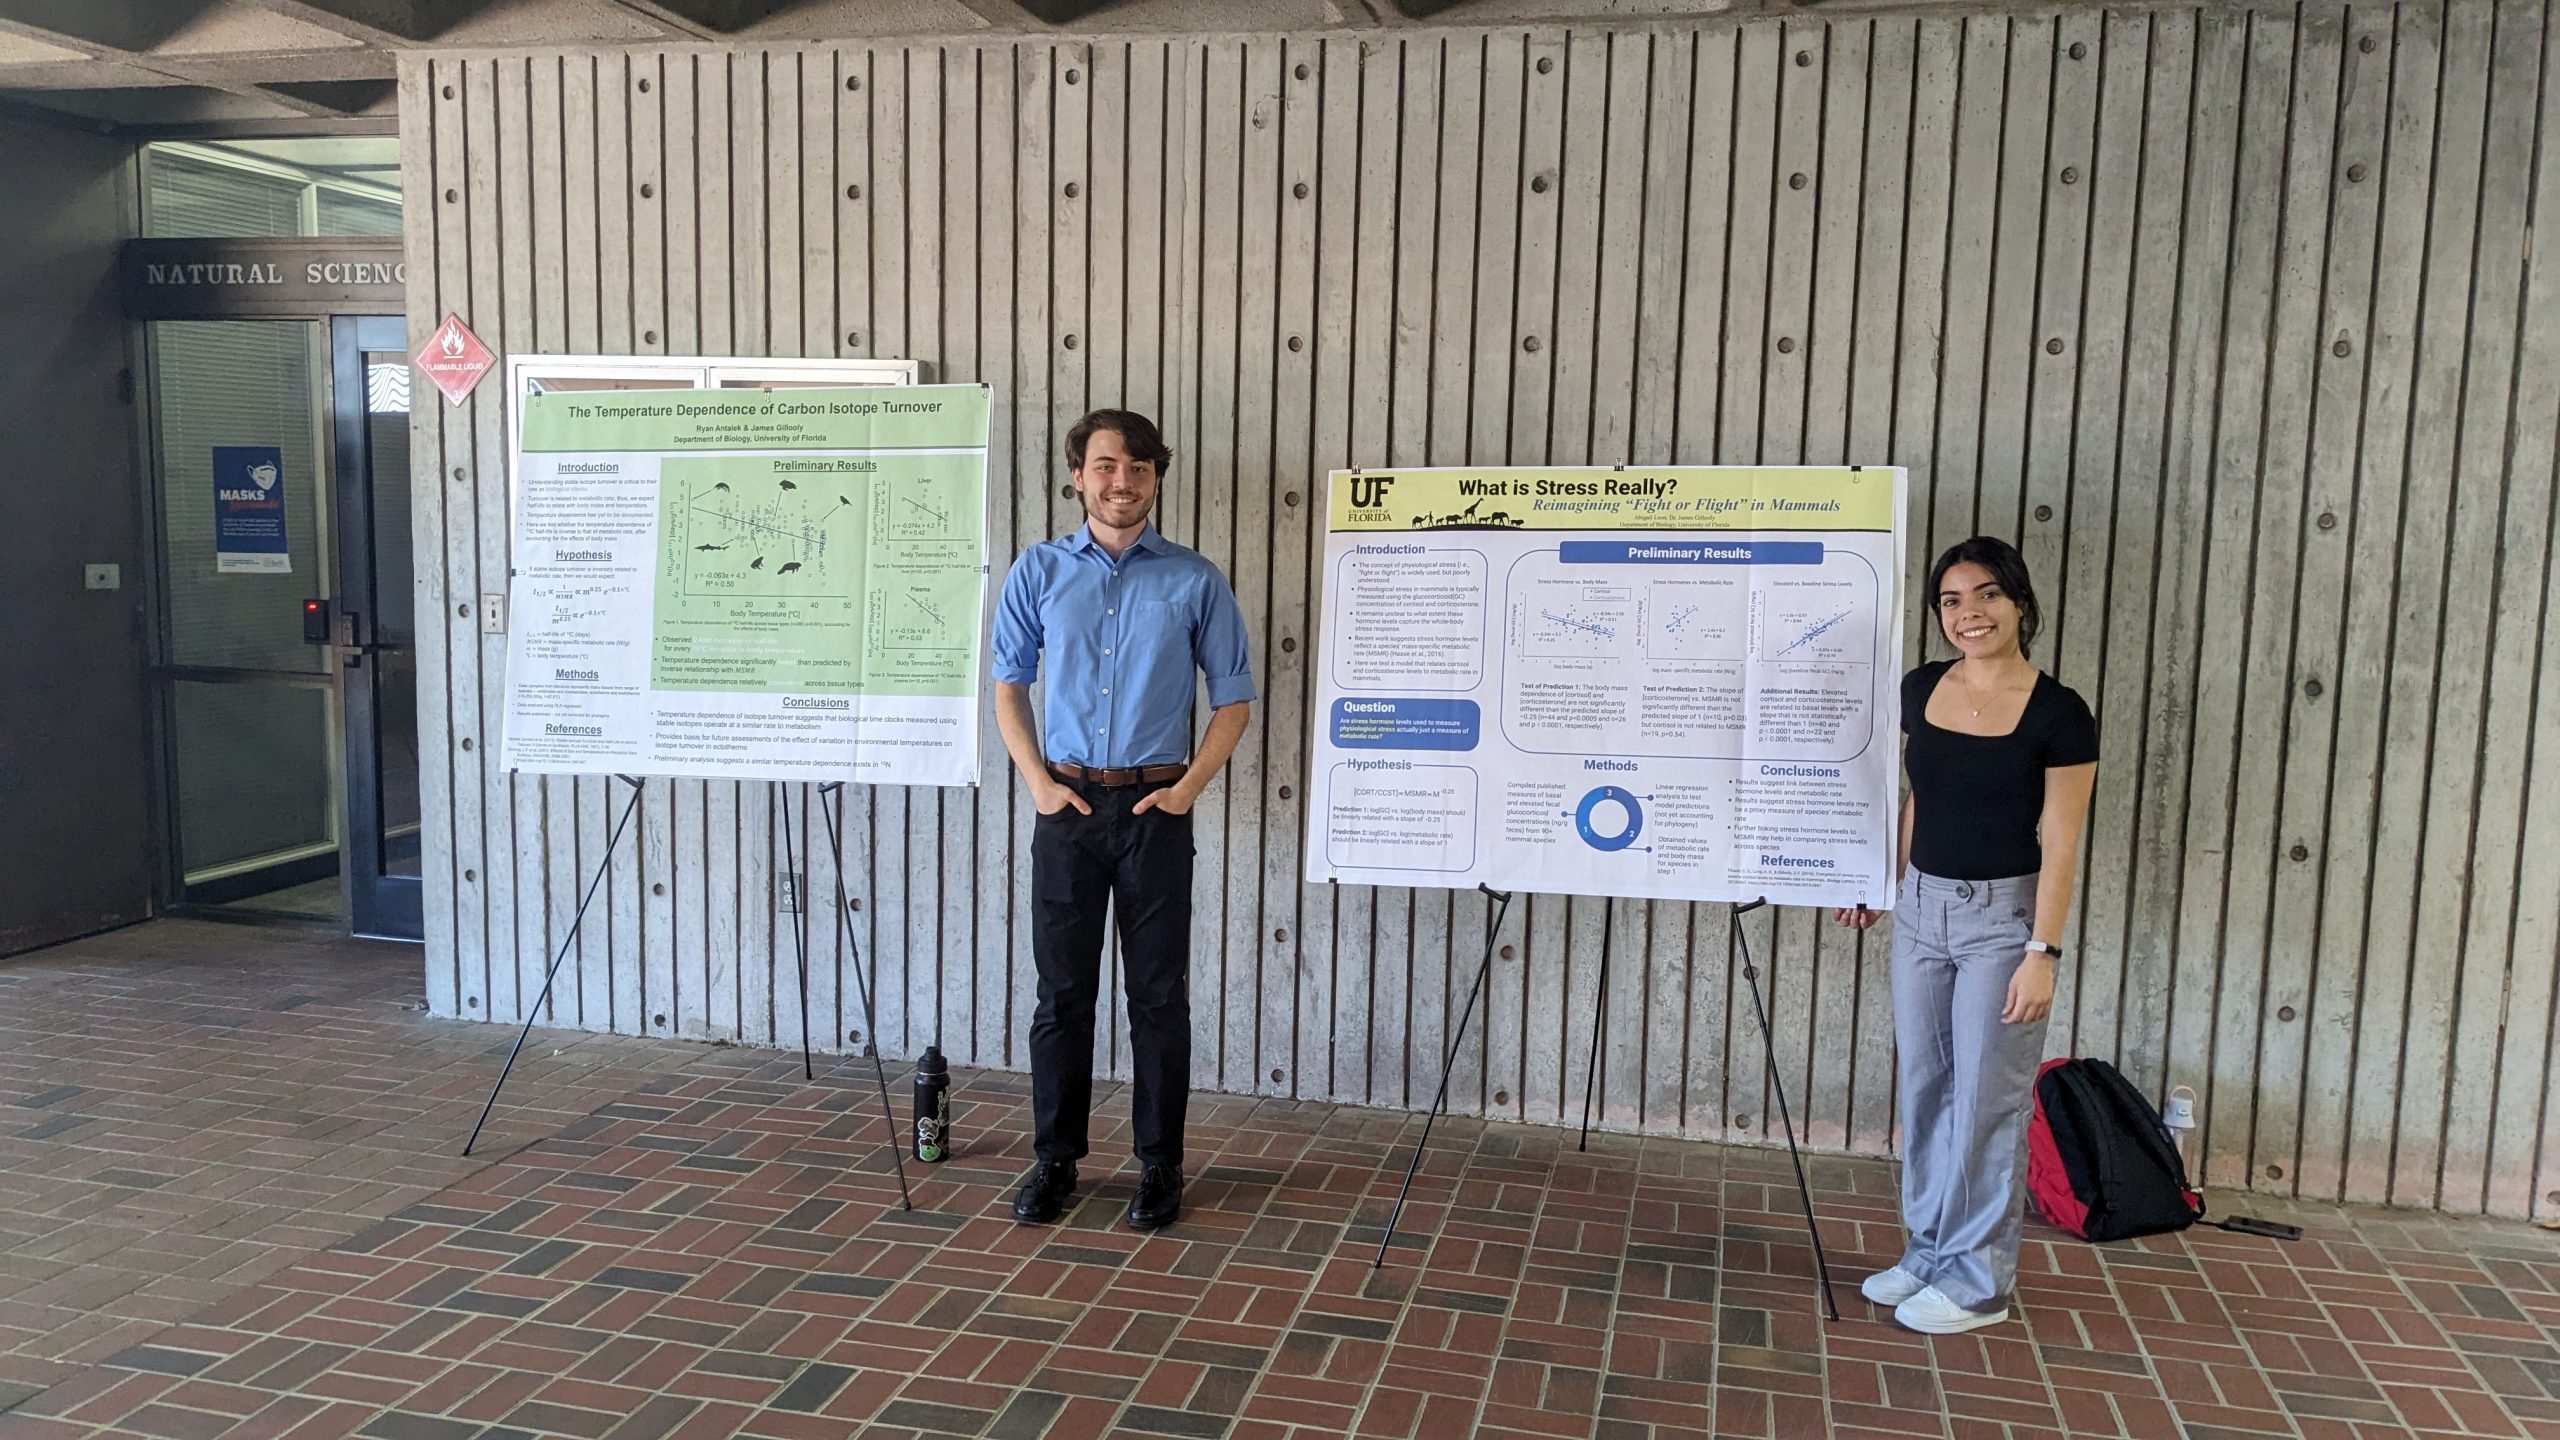 To the left: a student in a formal button-down shirt standing next to a green and white scientific poster with the title "The Temperature Dependence of Carbon Isotope Turnover."To the right: A student in a black blouse and formal pants standing next to a white and yellow scientific poster with the title "What is Stress Really?"